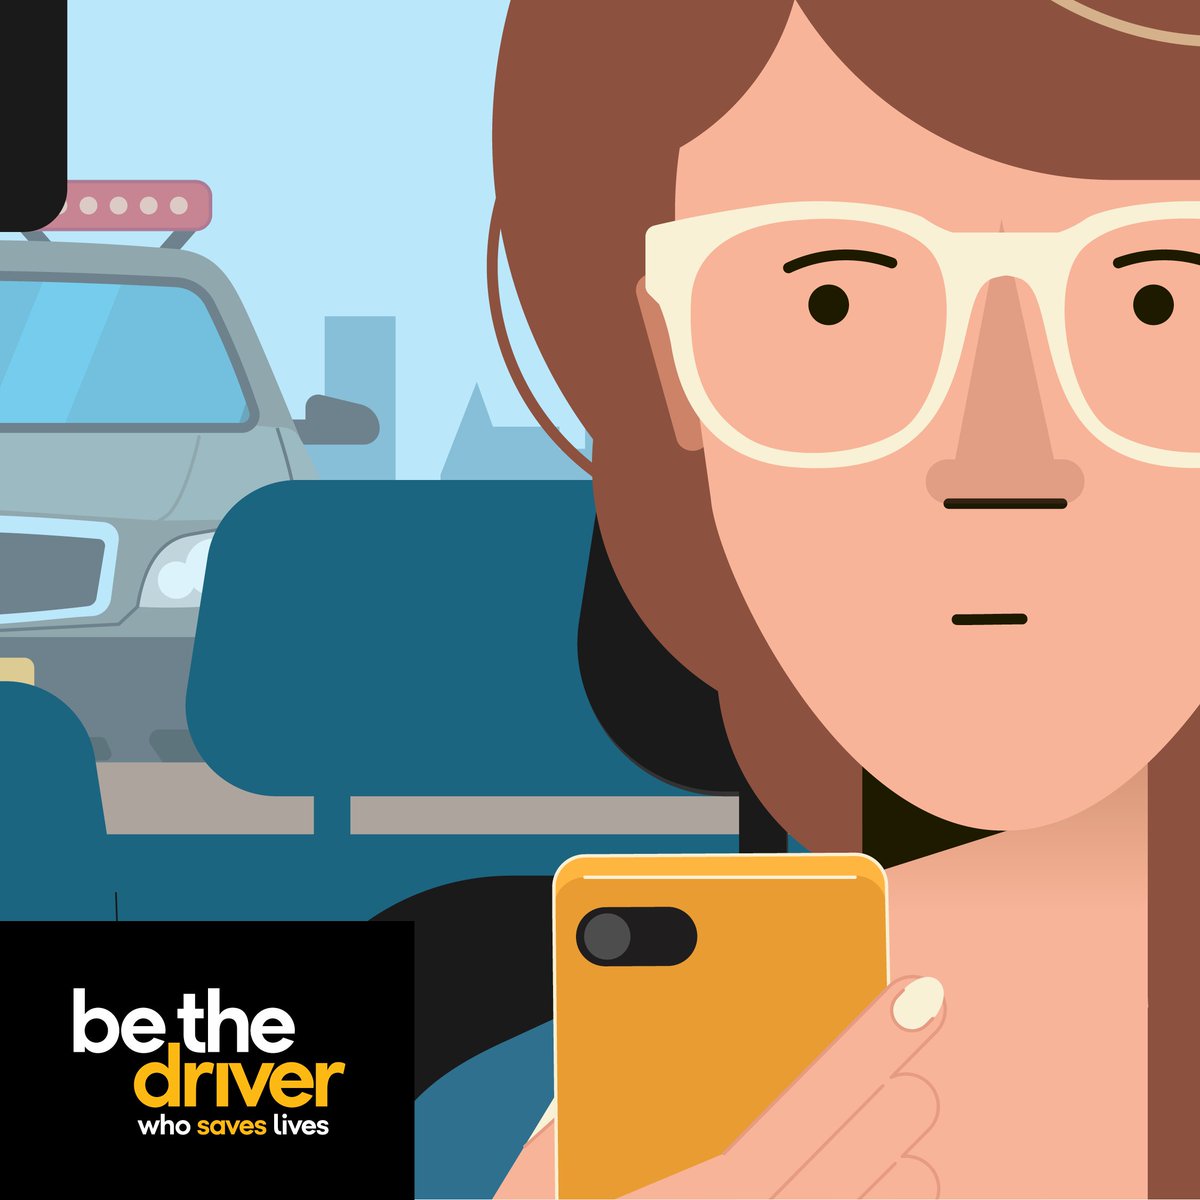 One slip in judgment can hold a lifetime of consequences. #BeTheDriver who says no to #DistractedDriving.